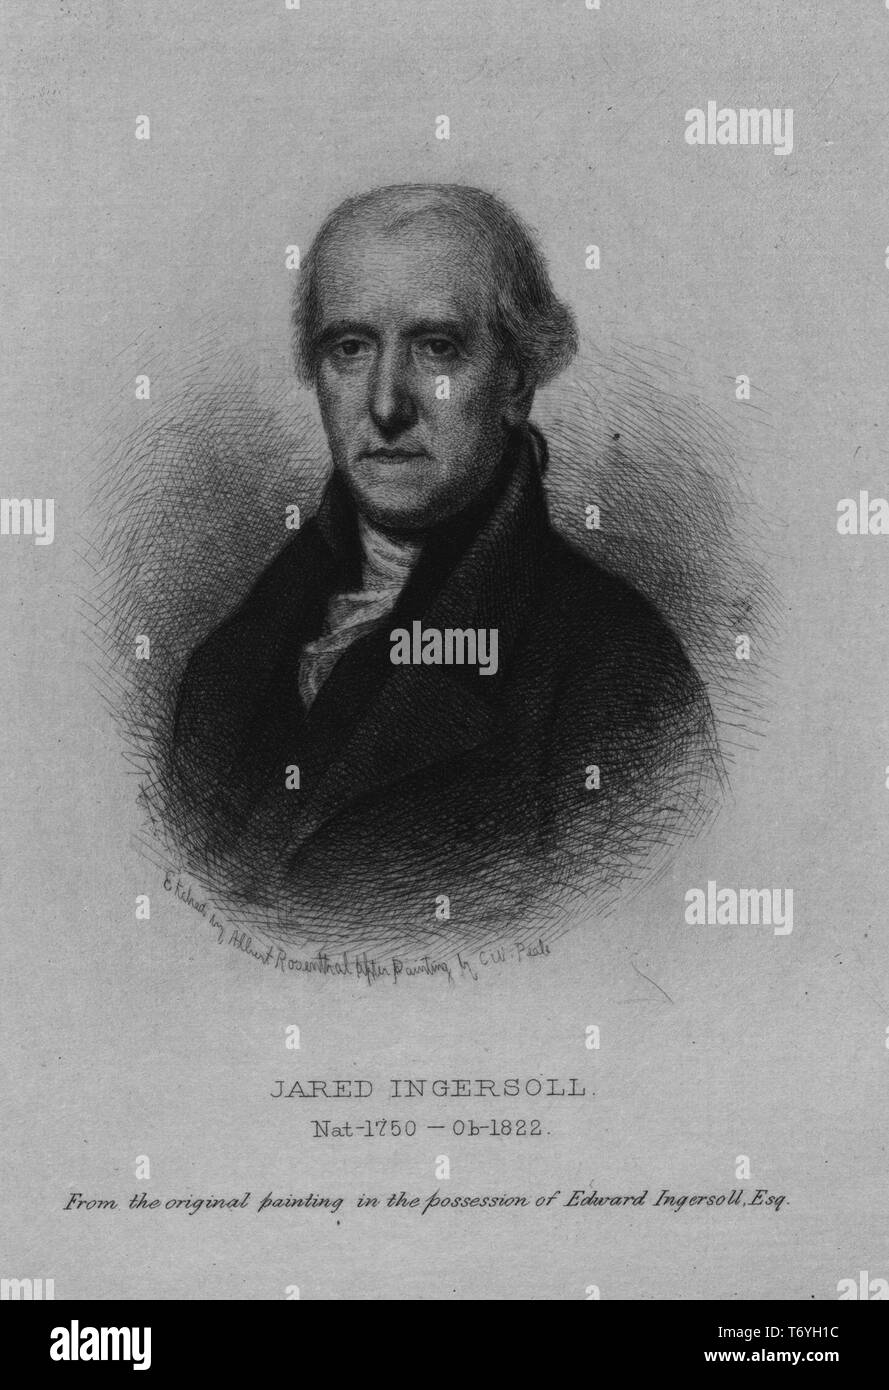 Black and white vintage print of Jared Ingersoll, a Philadelphia lawyer, statesman, Pennsylvania Attorney General, delegate to the Continental Congress, and signer of the United States Constitution, depicted from the chest up, in three quarter view, with a serious expression on his face, wearing a high-collared dark jacket, with an ascot tie, etched by Albert Rosenthal, after a painting by Charles Willson Peale, 1841. From the New York Public Library. () Stock Photo